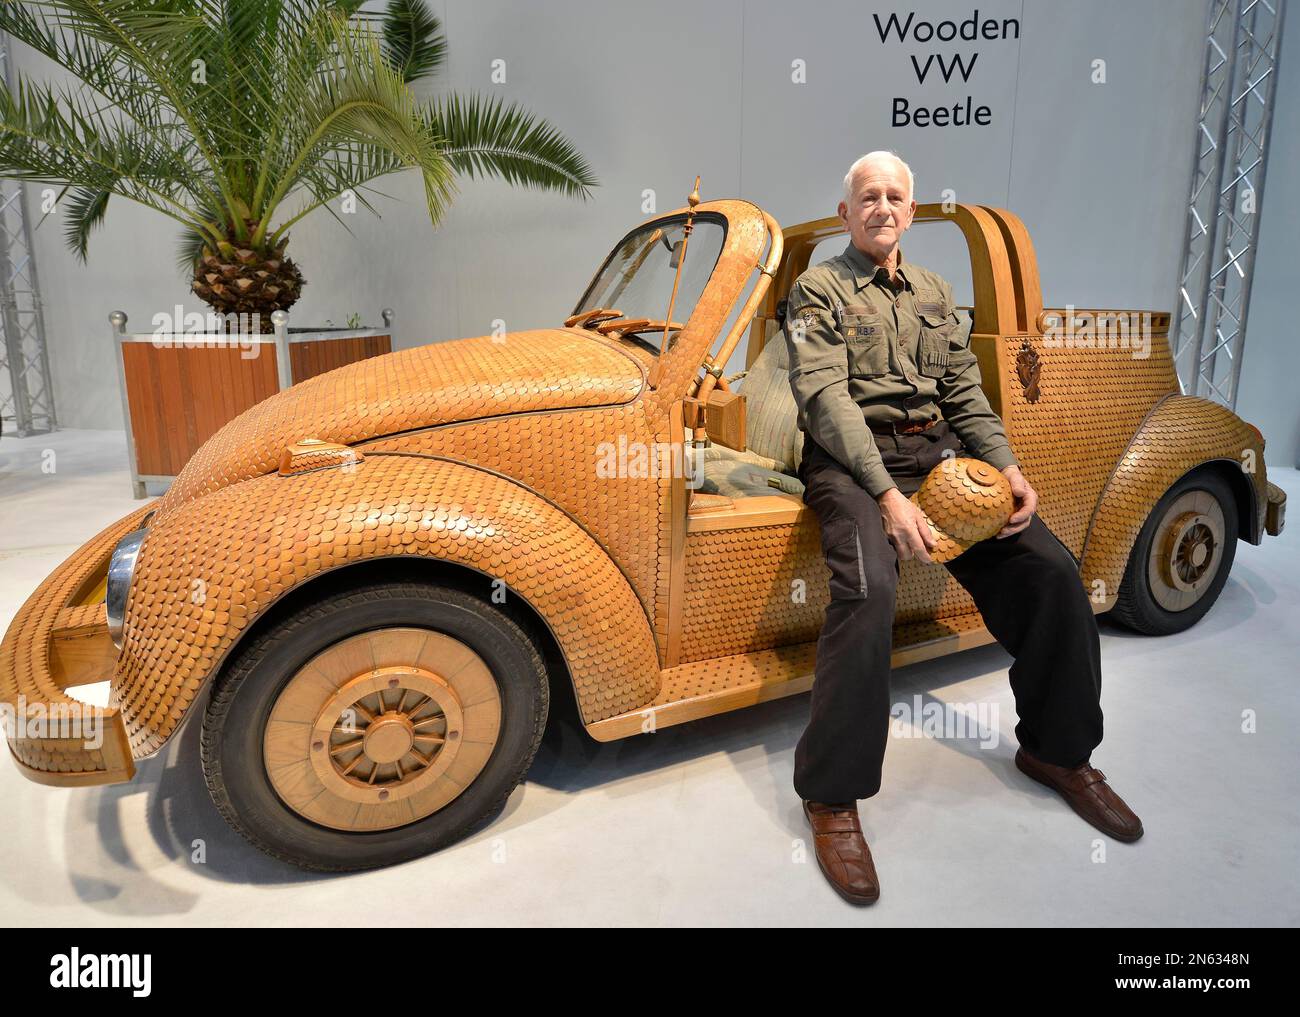 CORRECTS YEAR IN DATE -Momir Bojic from Bosnia Herzegovina sits in his  handmade wooden beetle at the opening of the Motor Show in Essen, Germany,  Friday, Nov. 29, 2013. The car is